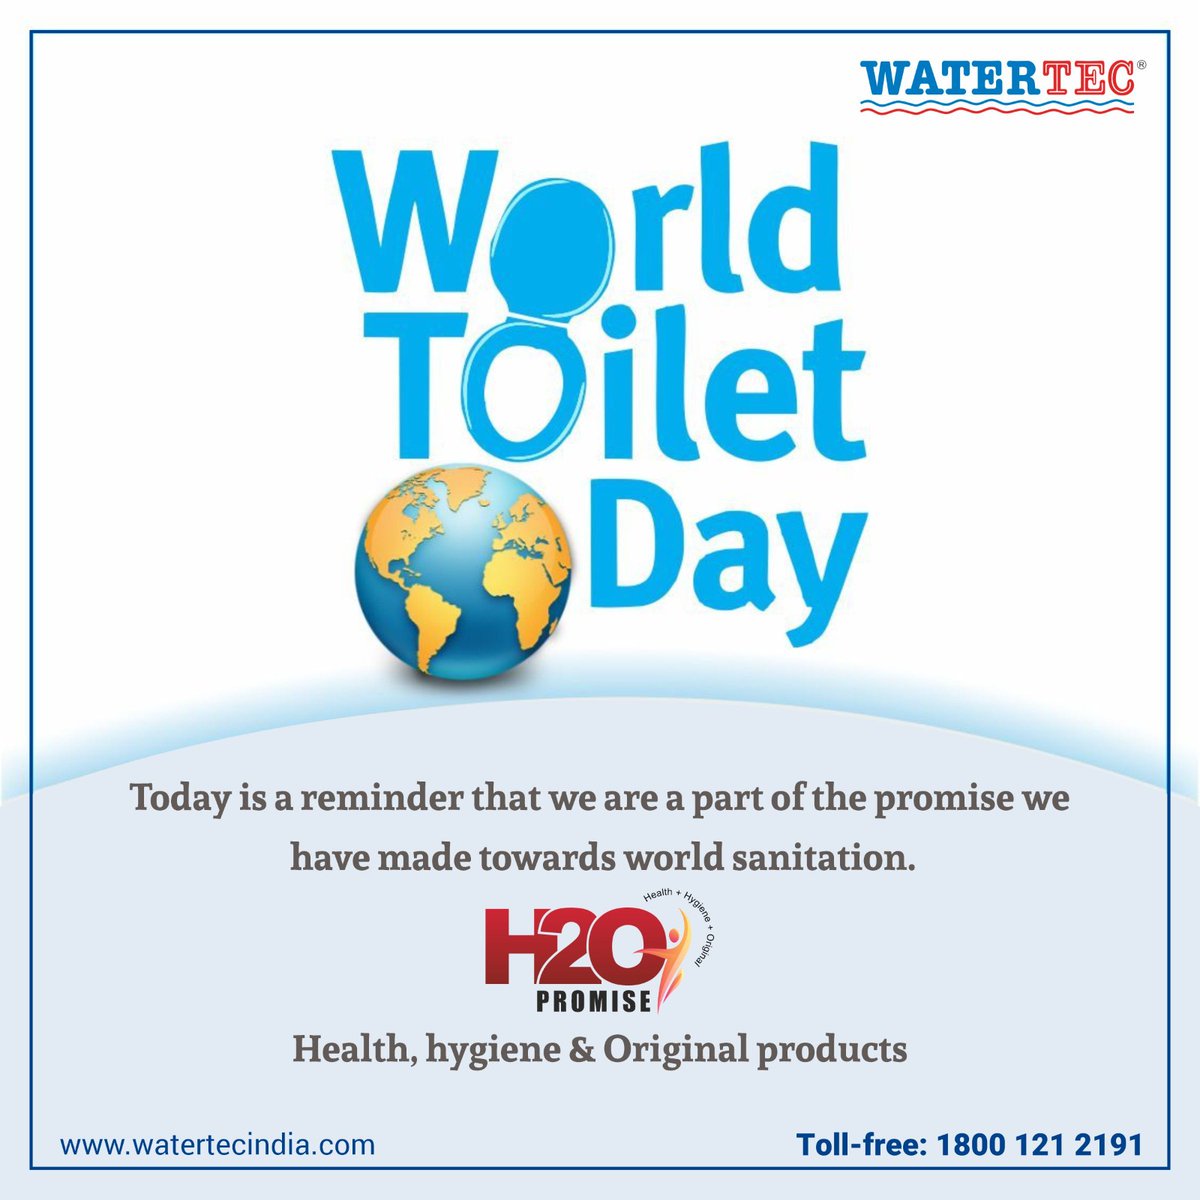 Today is a reminder that we are a part of the promise we have made towards world sanitation. 

H2O Promise – Health, hygiene & Original products

Wishing you a Happy World Toilet Day

#worldtoiletday #sanitation #toiletday #opendefecation #toilet #igiveashit